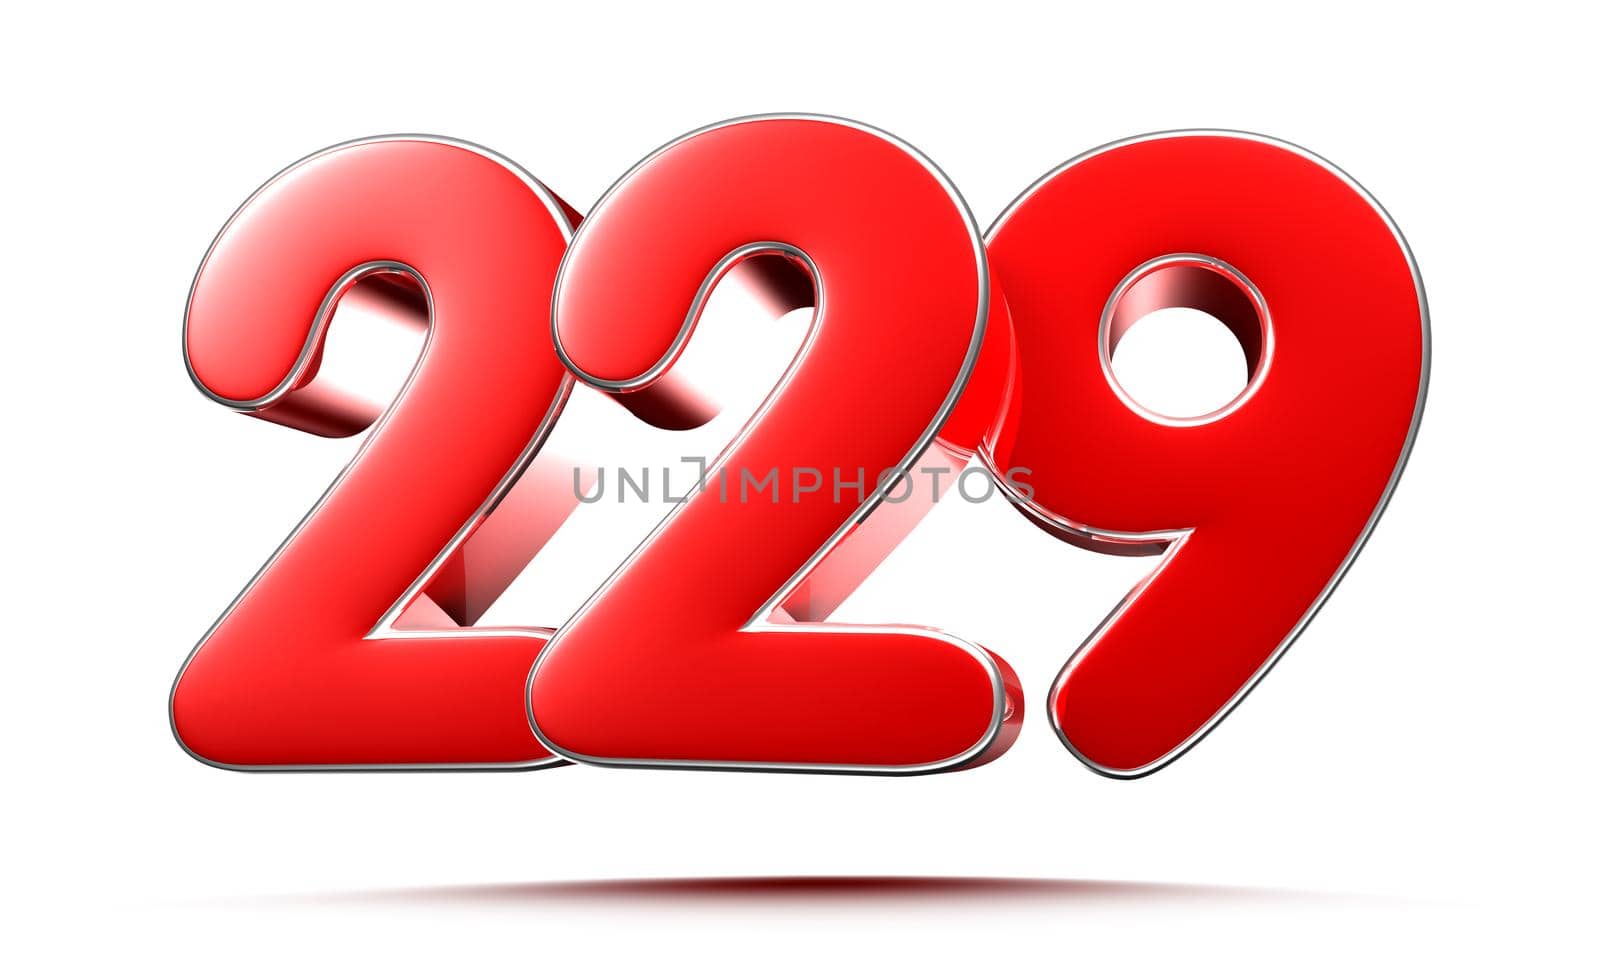 Rounded red numbers 229 on white background 3D illustration with clipping path by thitimontoyai